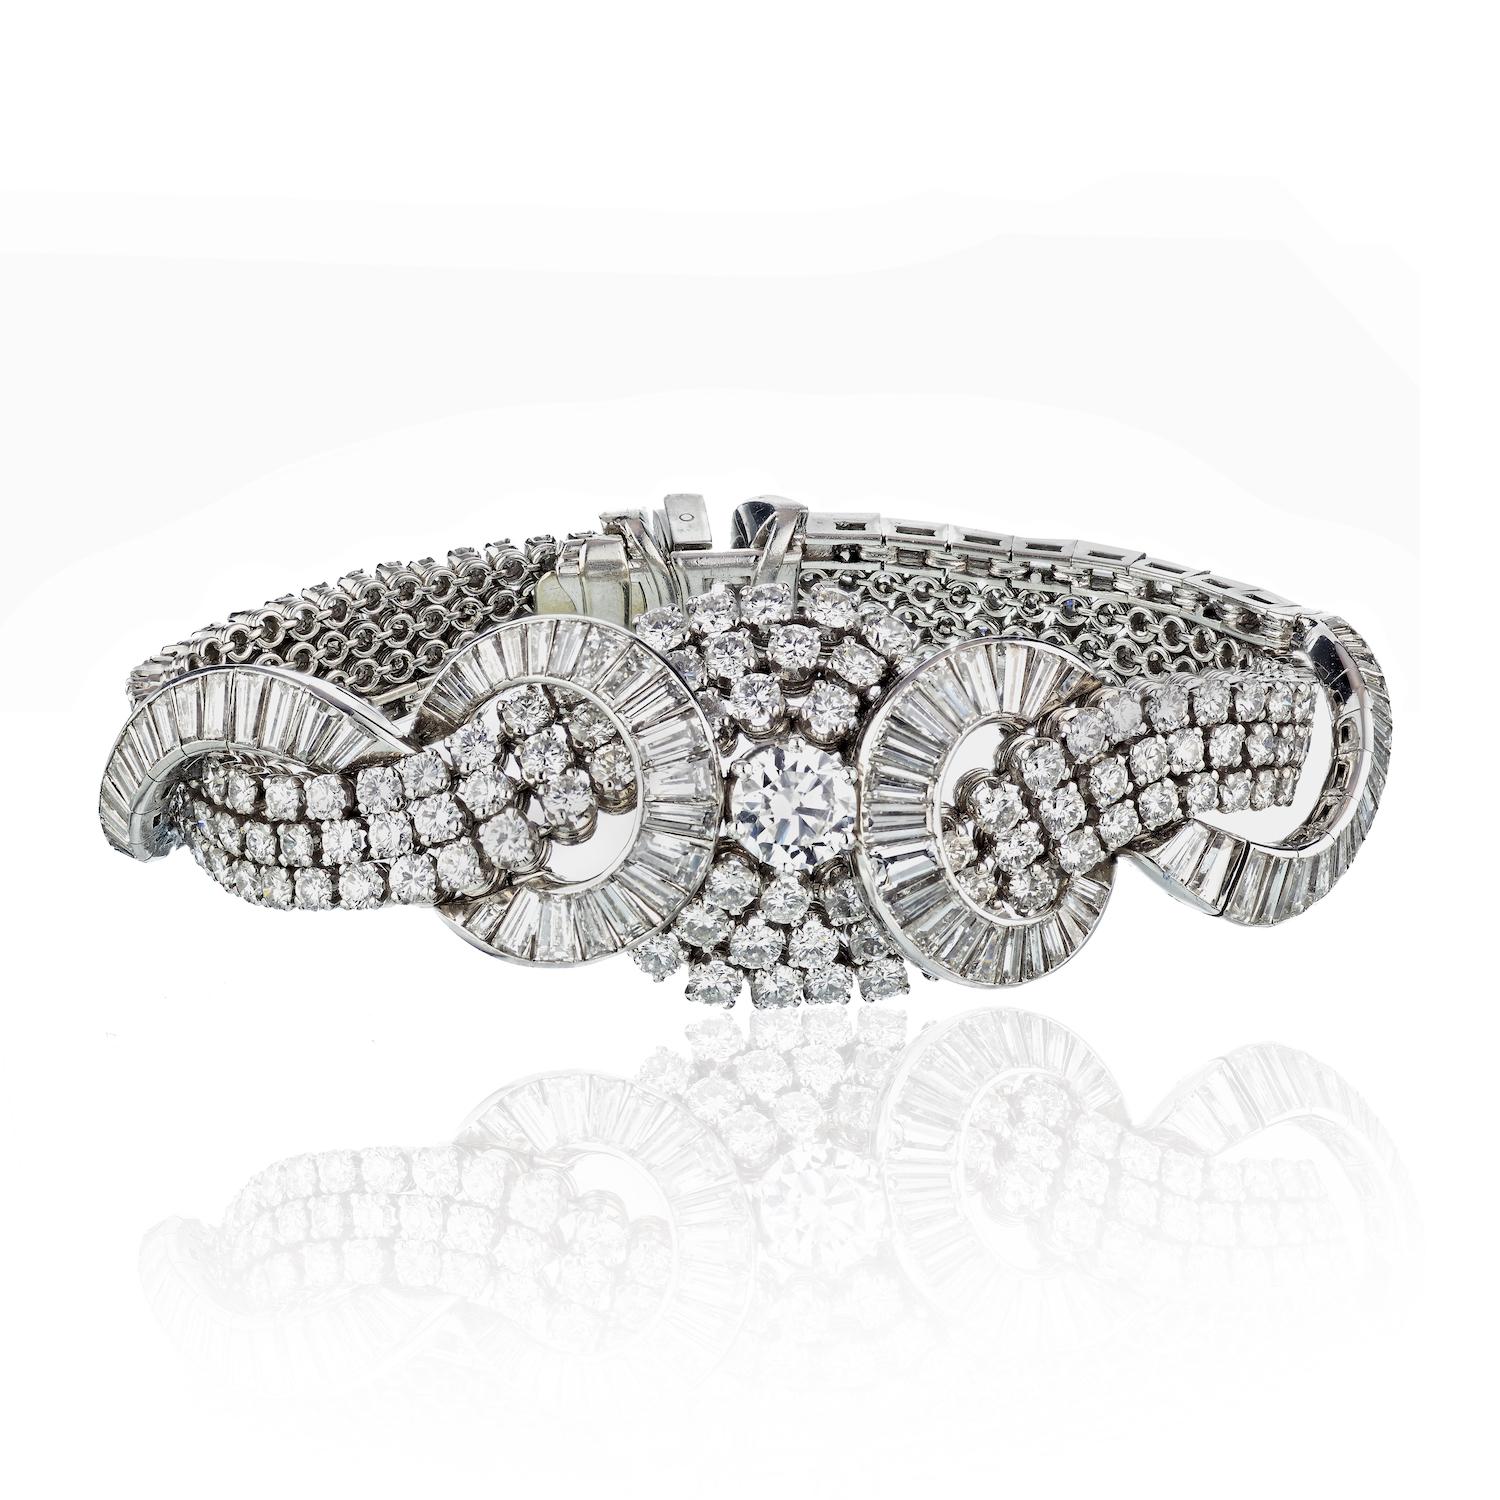 Crafted with unparalleled artistry and adorned with the most exquisite diamonds, our Art Deco Platinum Cluster Diamond 38.00cttw Bracelet is a testament to timeless elegance. Every aspect of this remarkable piece is a celebration of beauty and